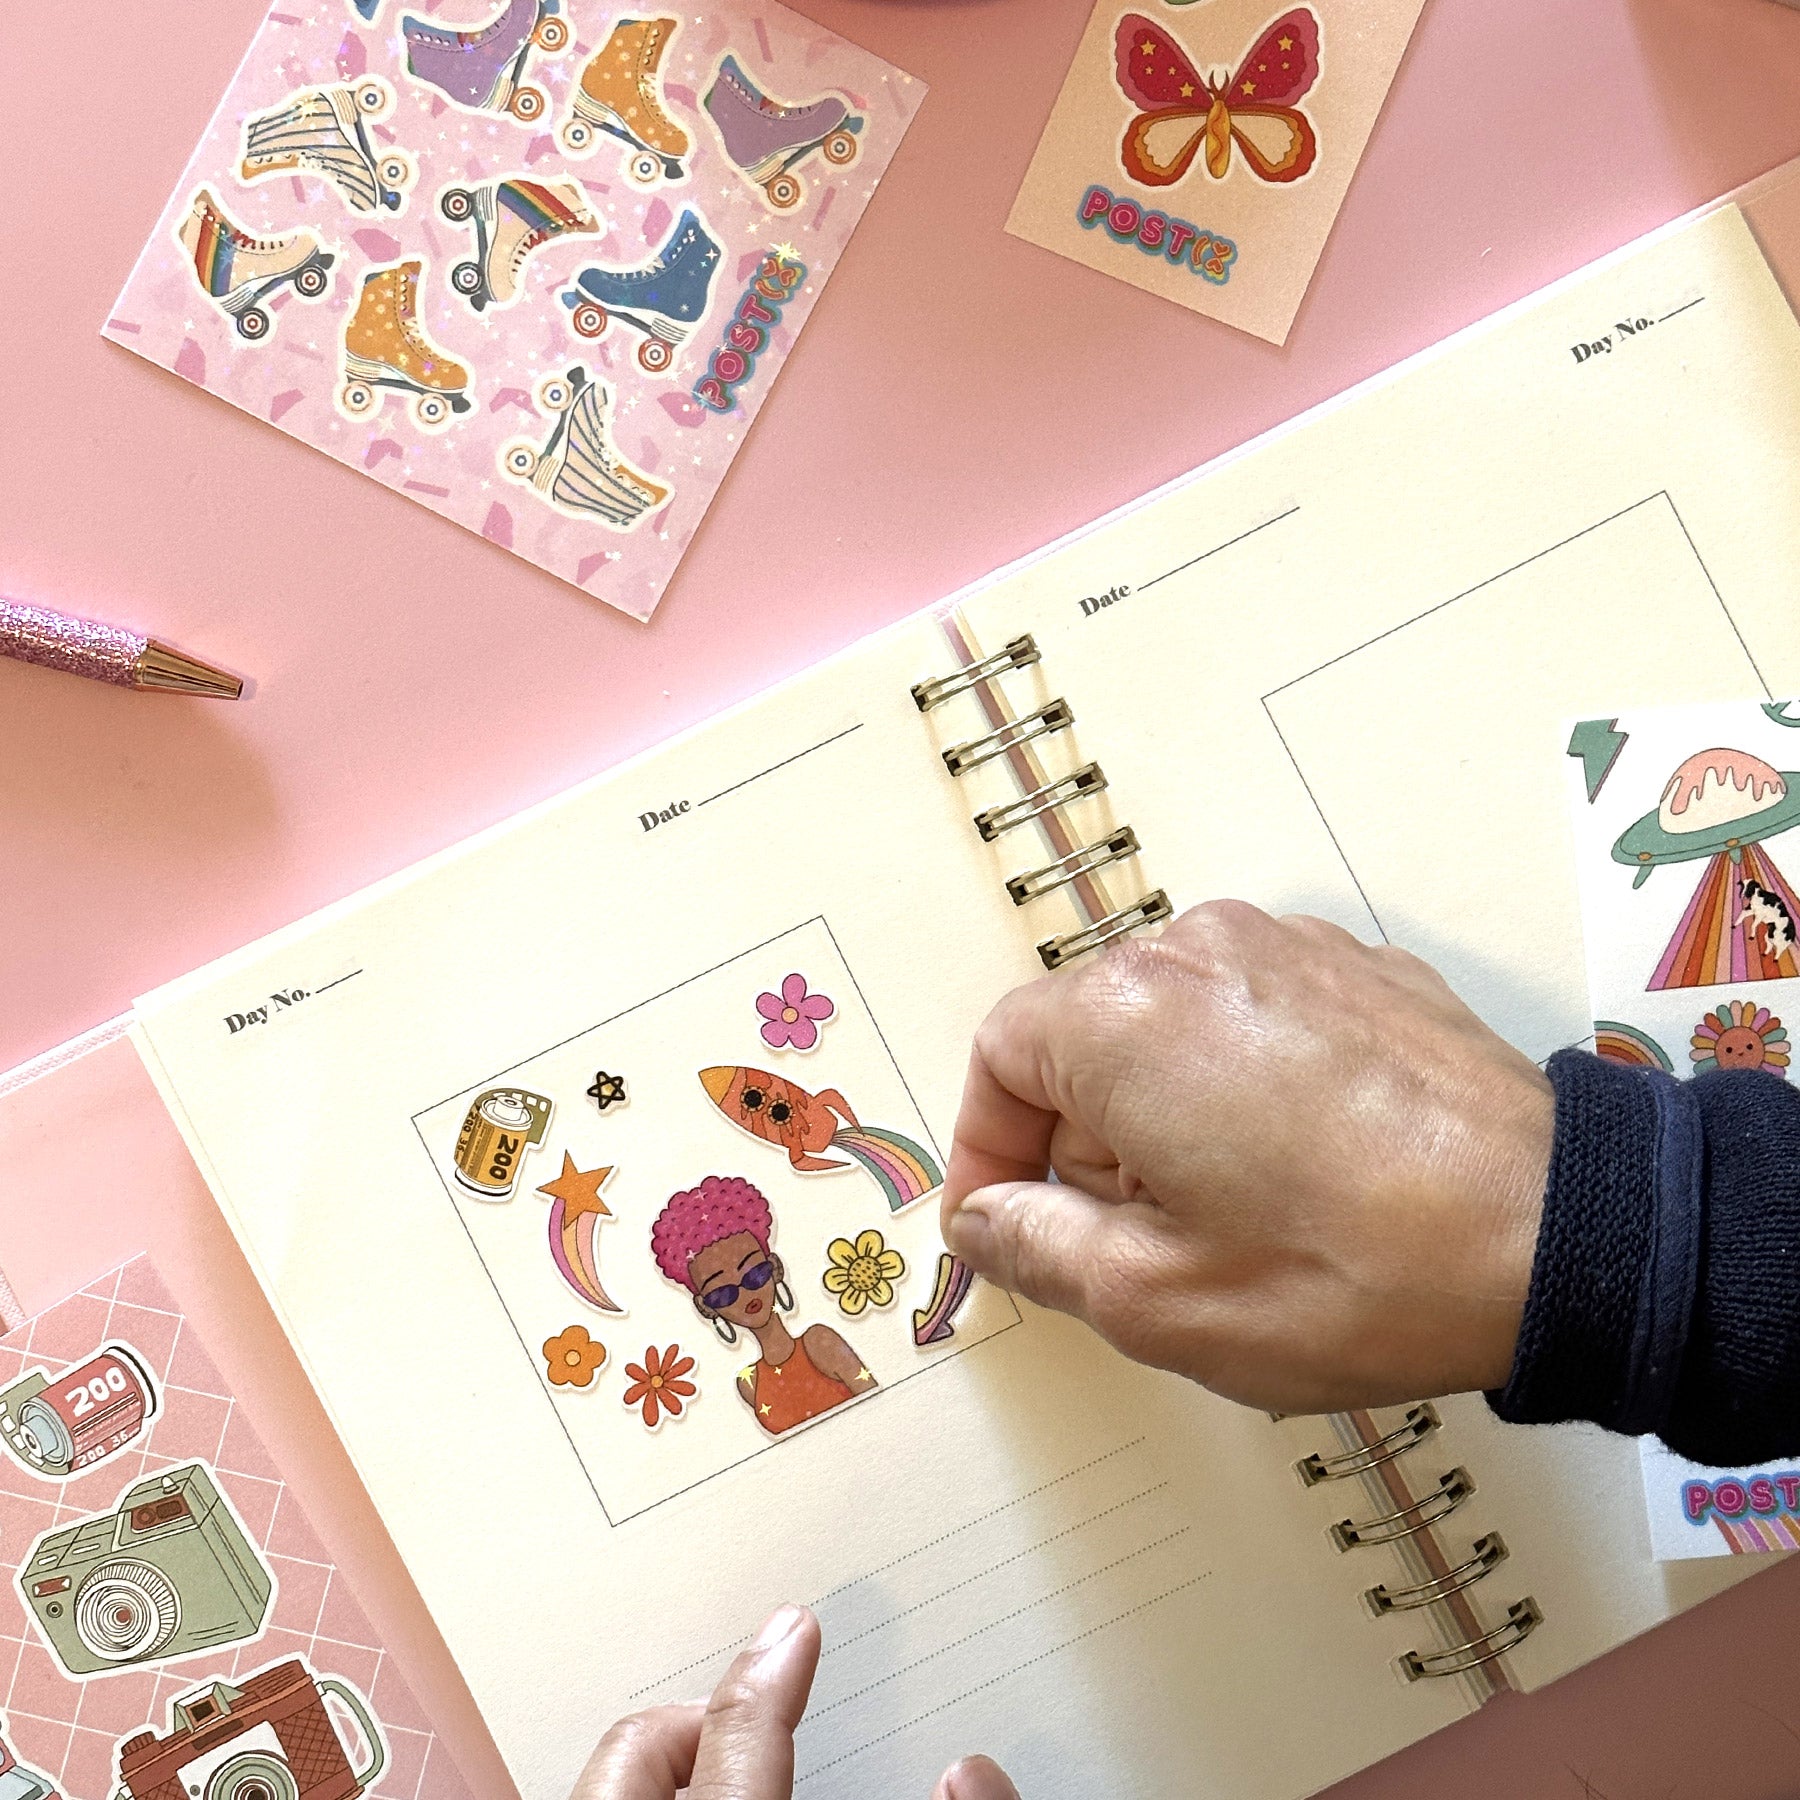 A woman decorates her journal with Postix stickers